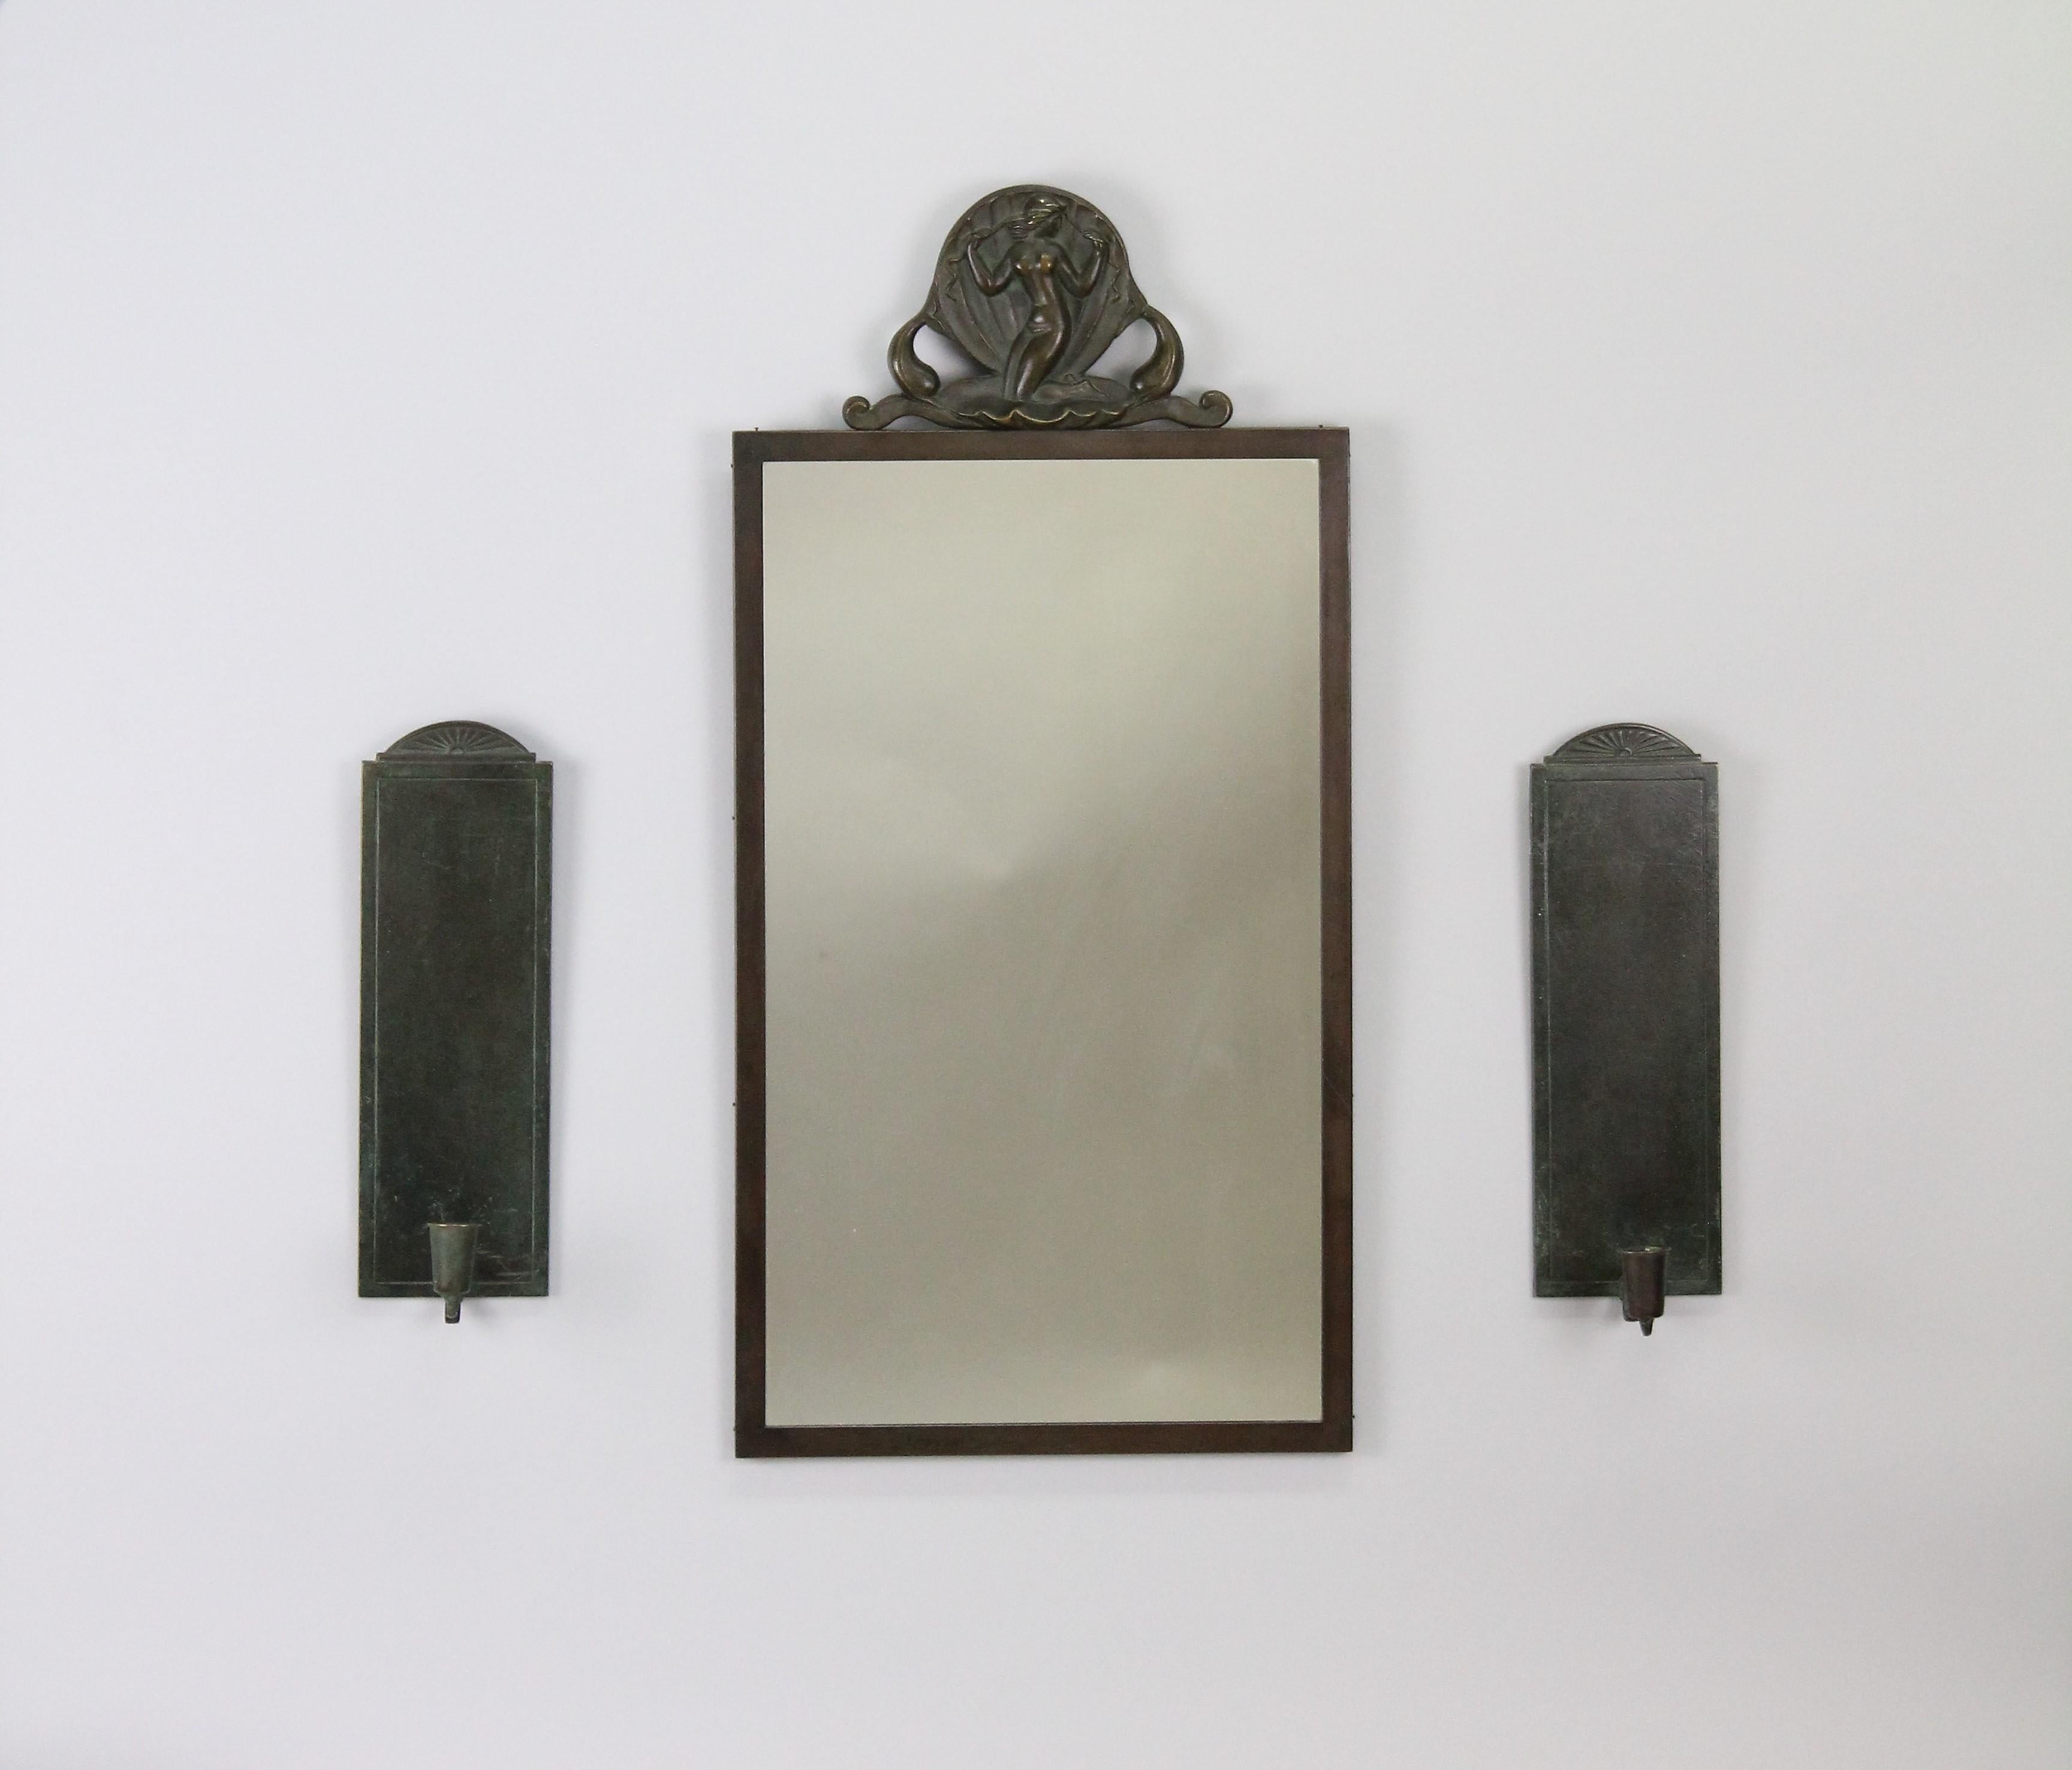 A very nice set of a mirror and a pair of scones.
Made in Sweden by Oscar Antonsson for Ystad Brons in the 1930s.
Very nice original condition, no issues!
Made in bronze which has been patinated in green/brown colors.

Measurement:
Mirror,